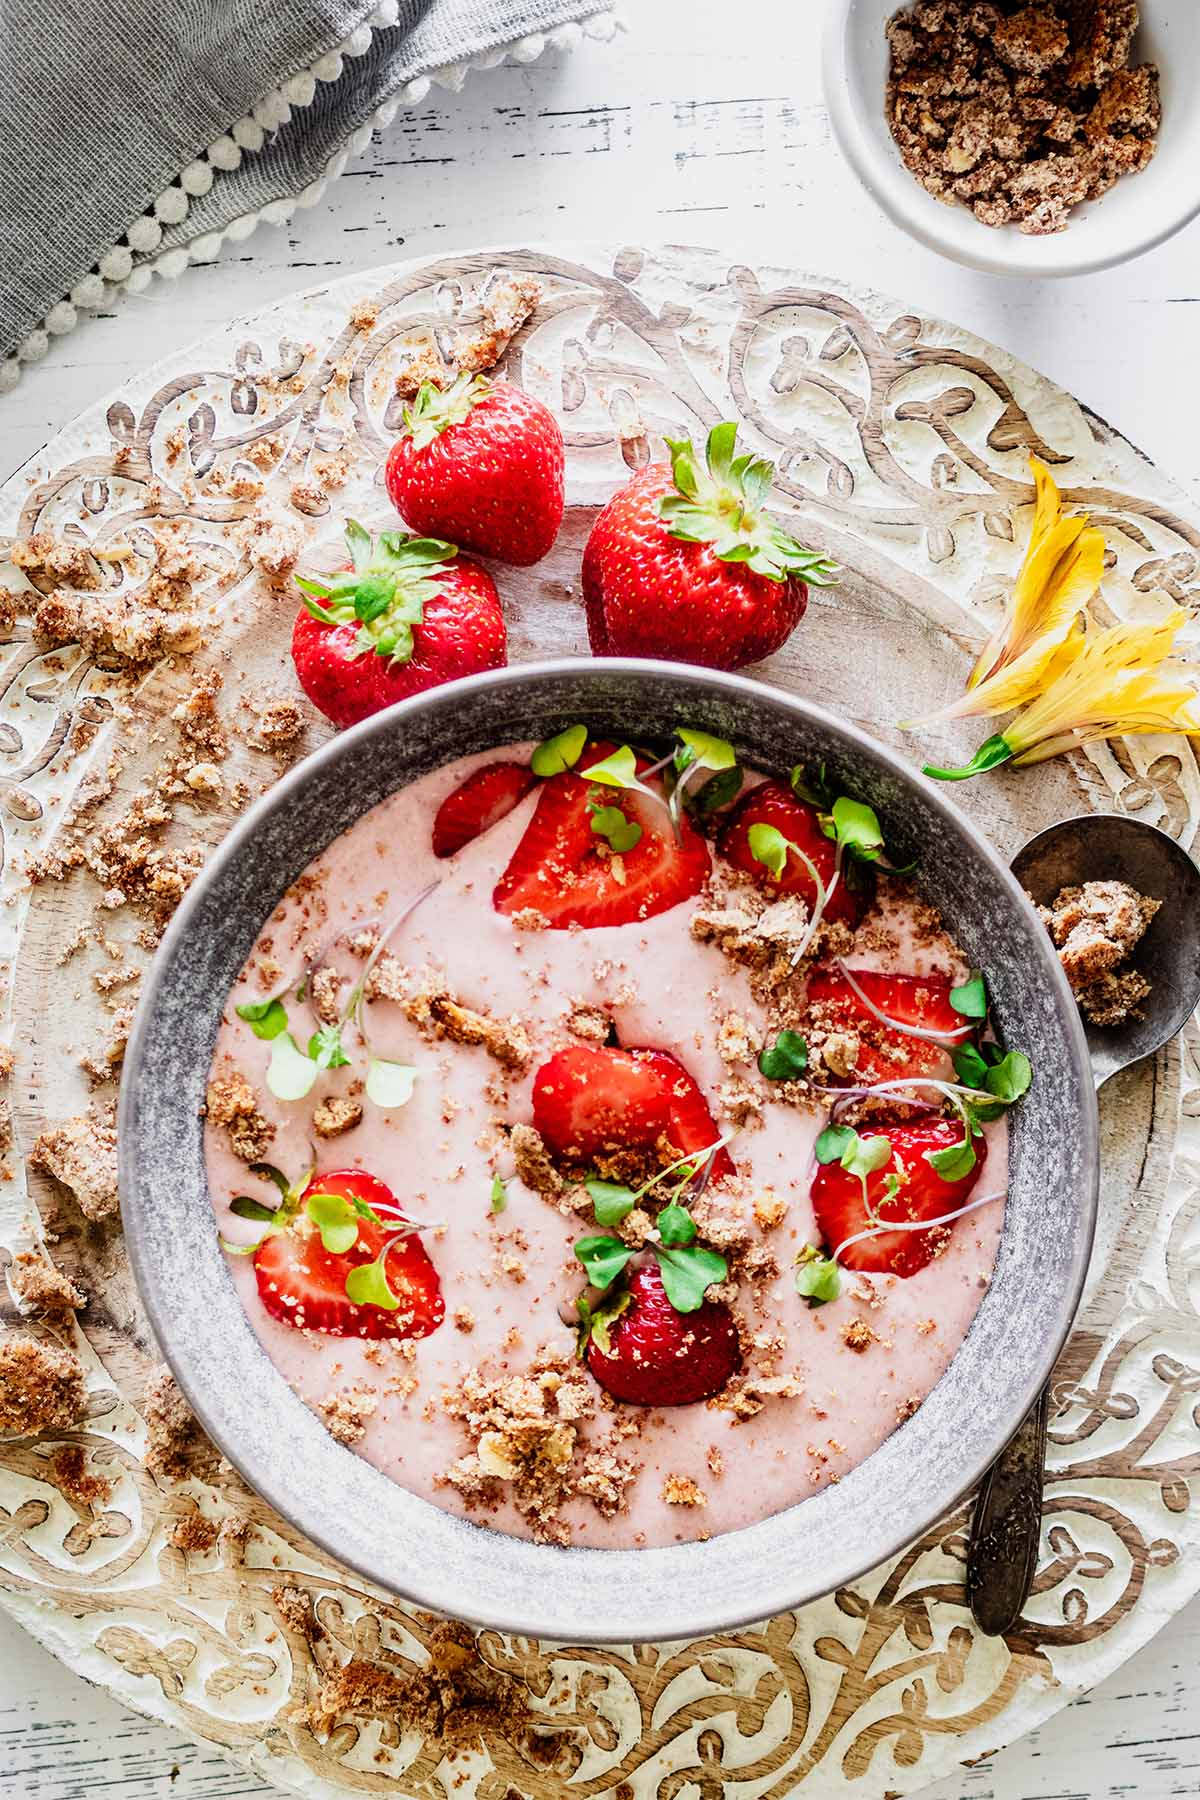 Strawberry banana smoothie bowl topped with sliced strawberries, crumble, and micro greens in a grey bowl with fresh whole strawberries off to the side.